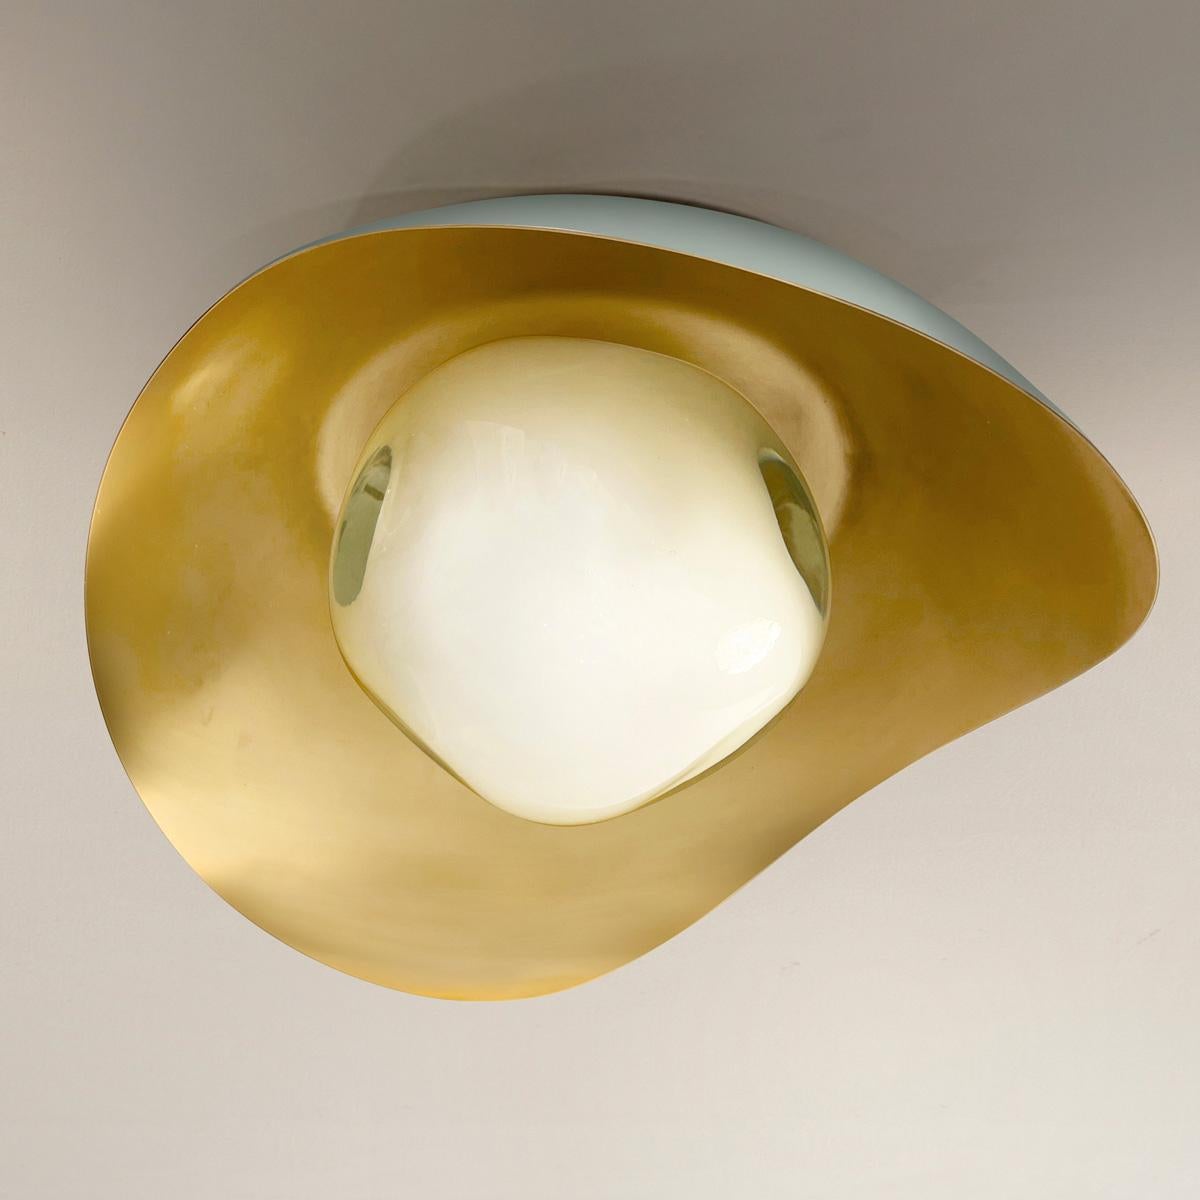 Perla Flushmount Ceiling Light by Gaspare Asaro-Satin Brass/Acqua Finish In New Condition For Sale In New York, NY